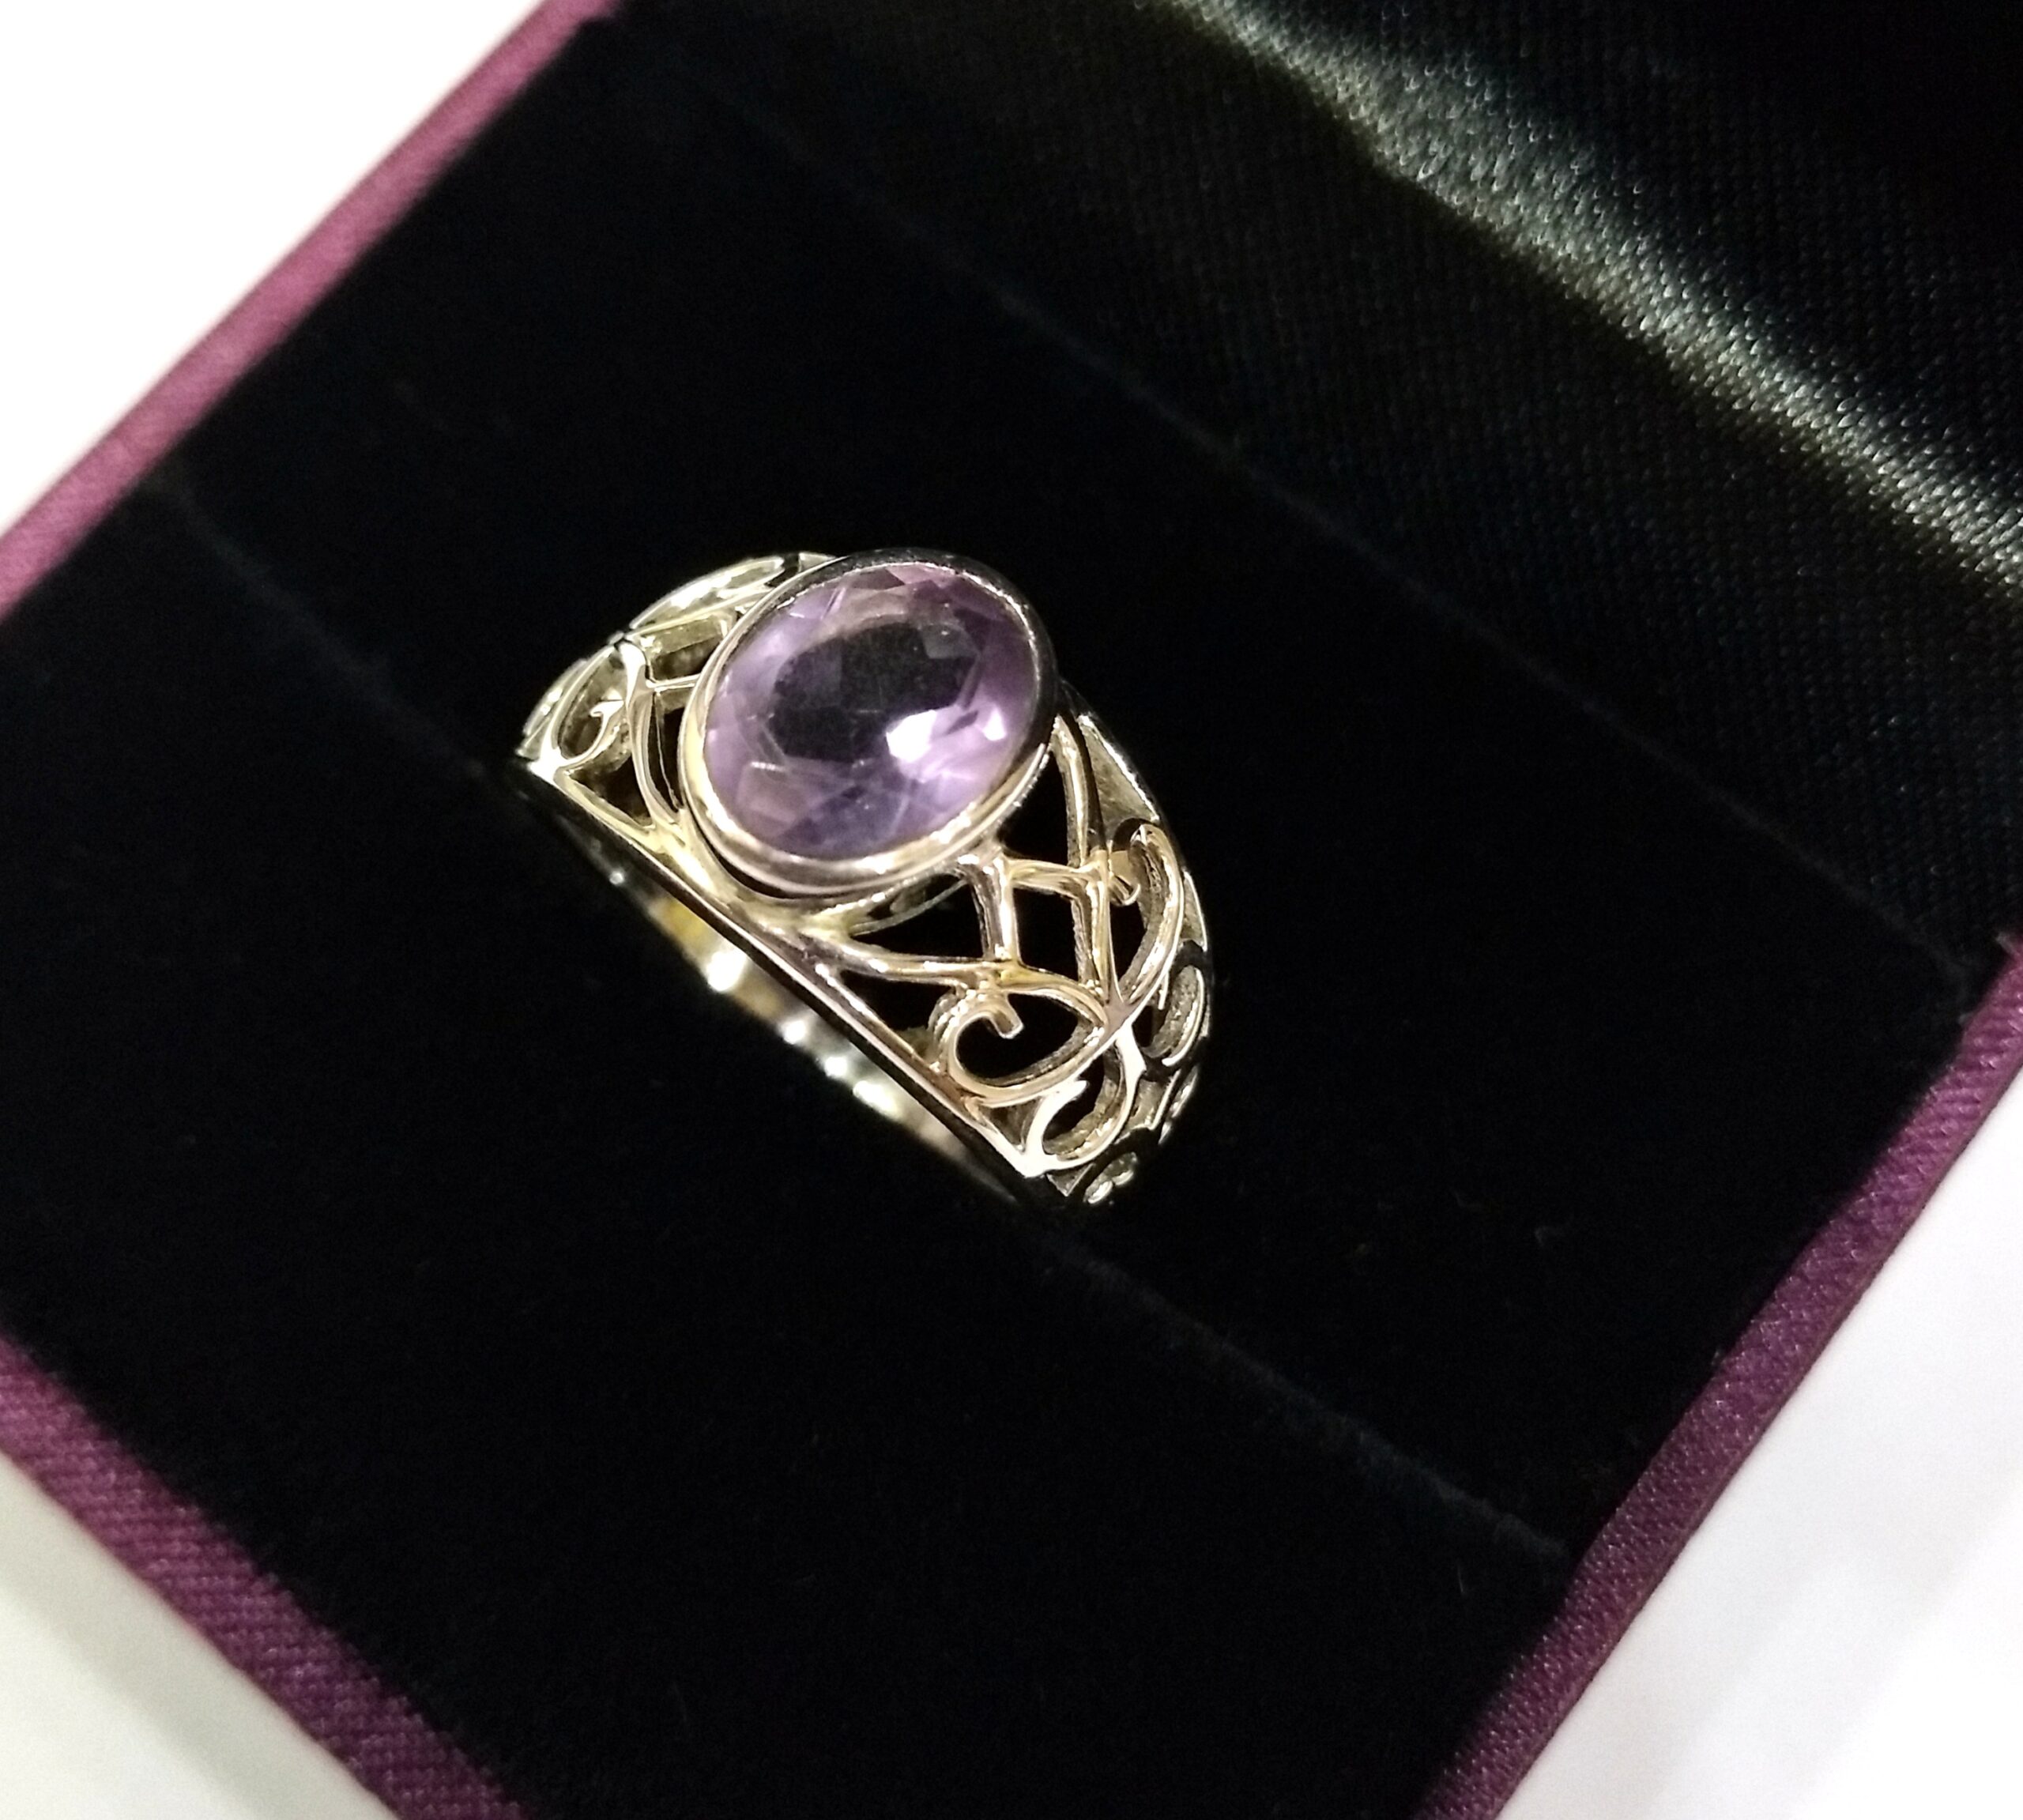 New Big Size Amethyst Ring For Women Jewelry Real 925 Silver New Design  Good Gift Purple Gemstone Birthstone Five Star - Rings - AliExpress